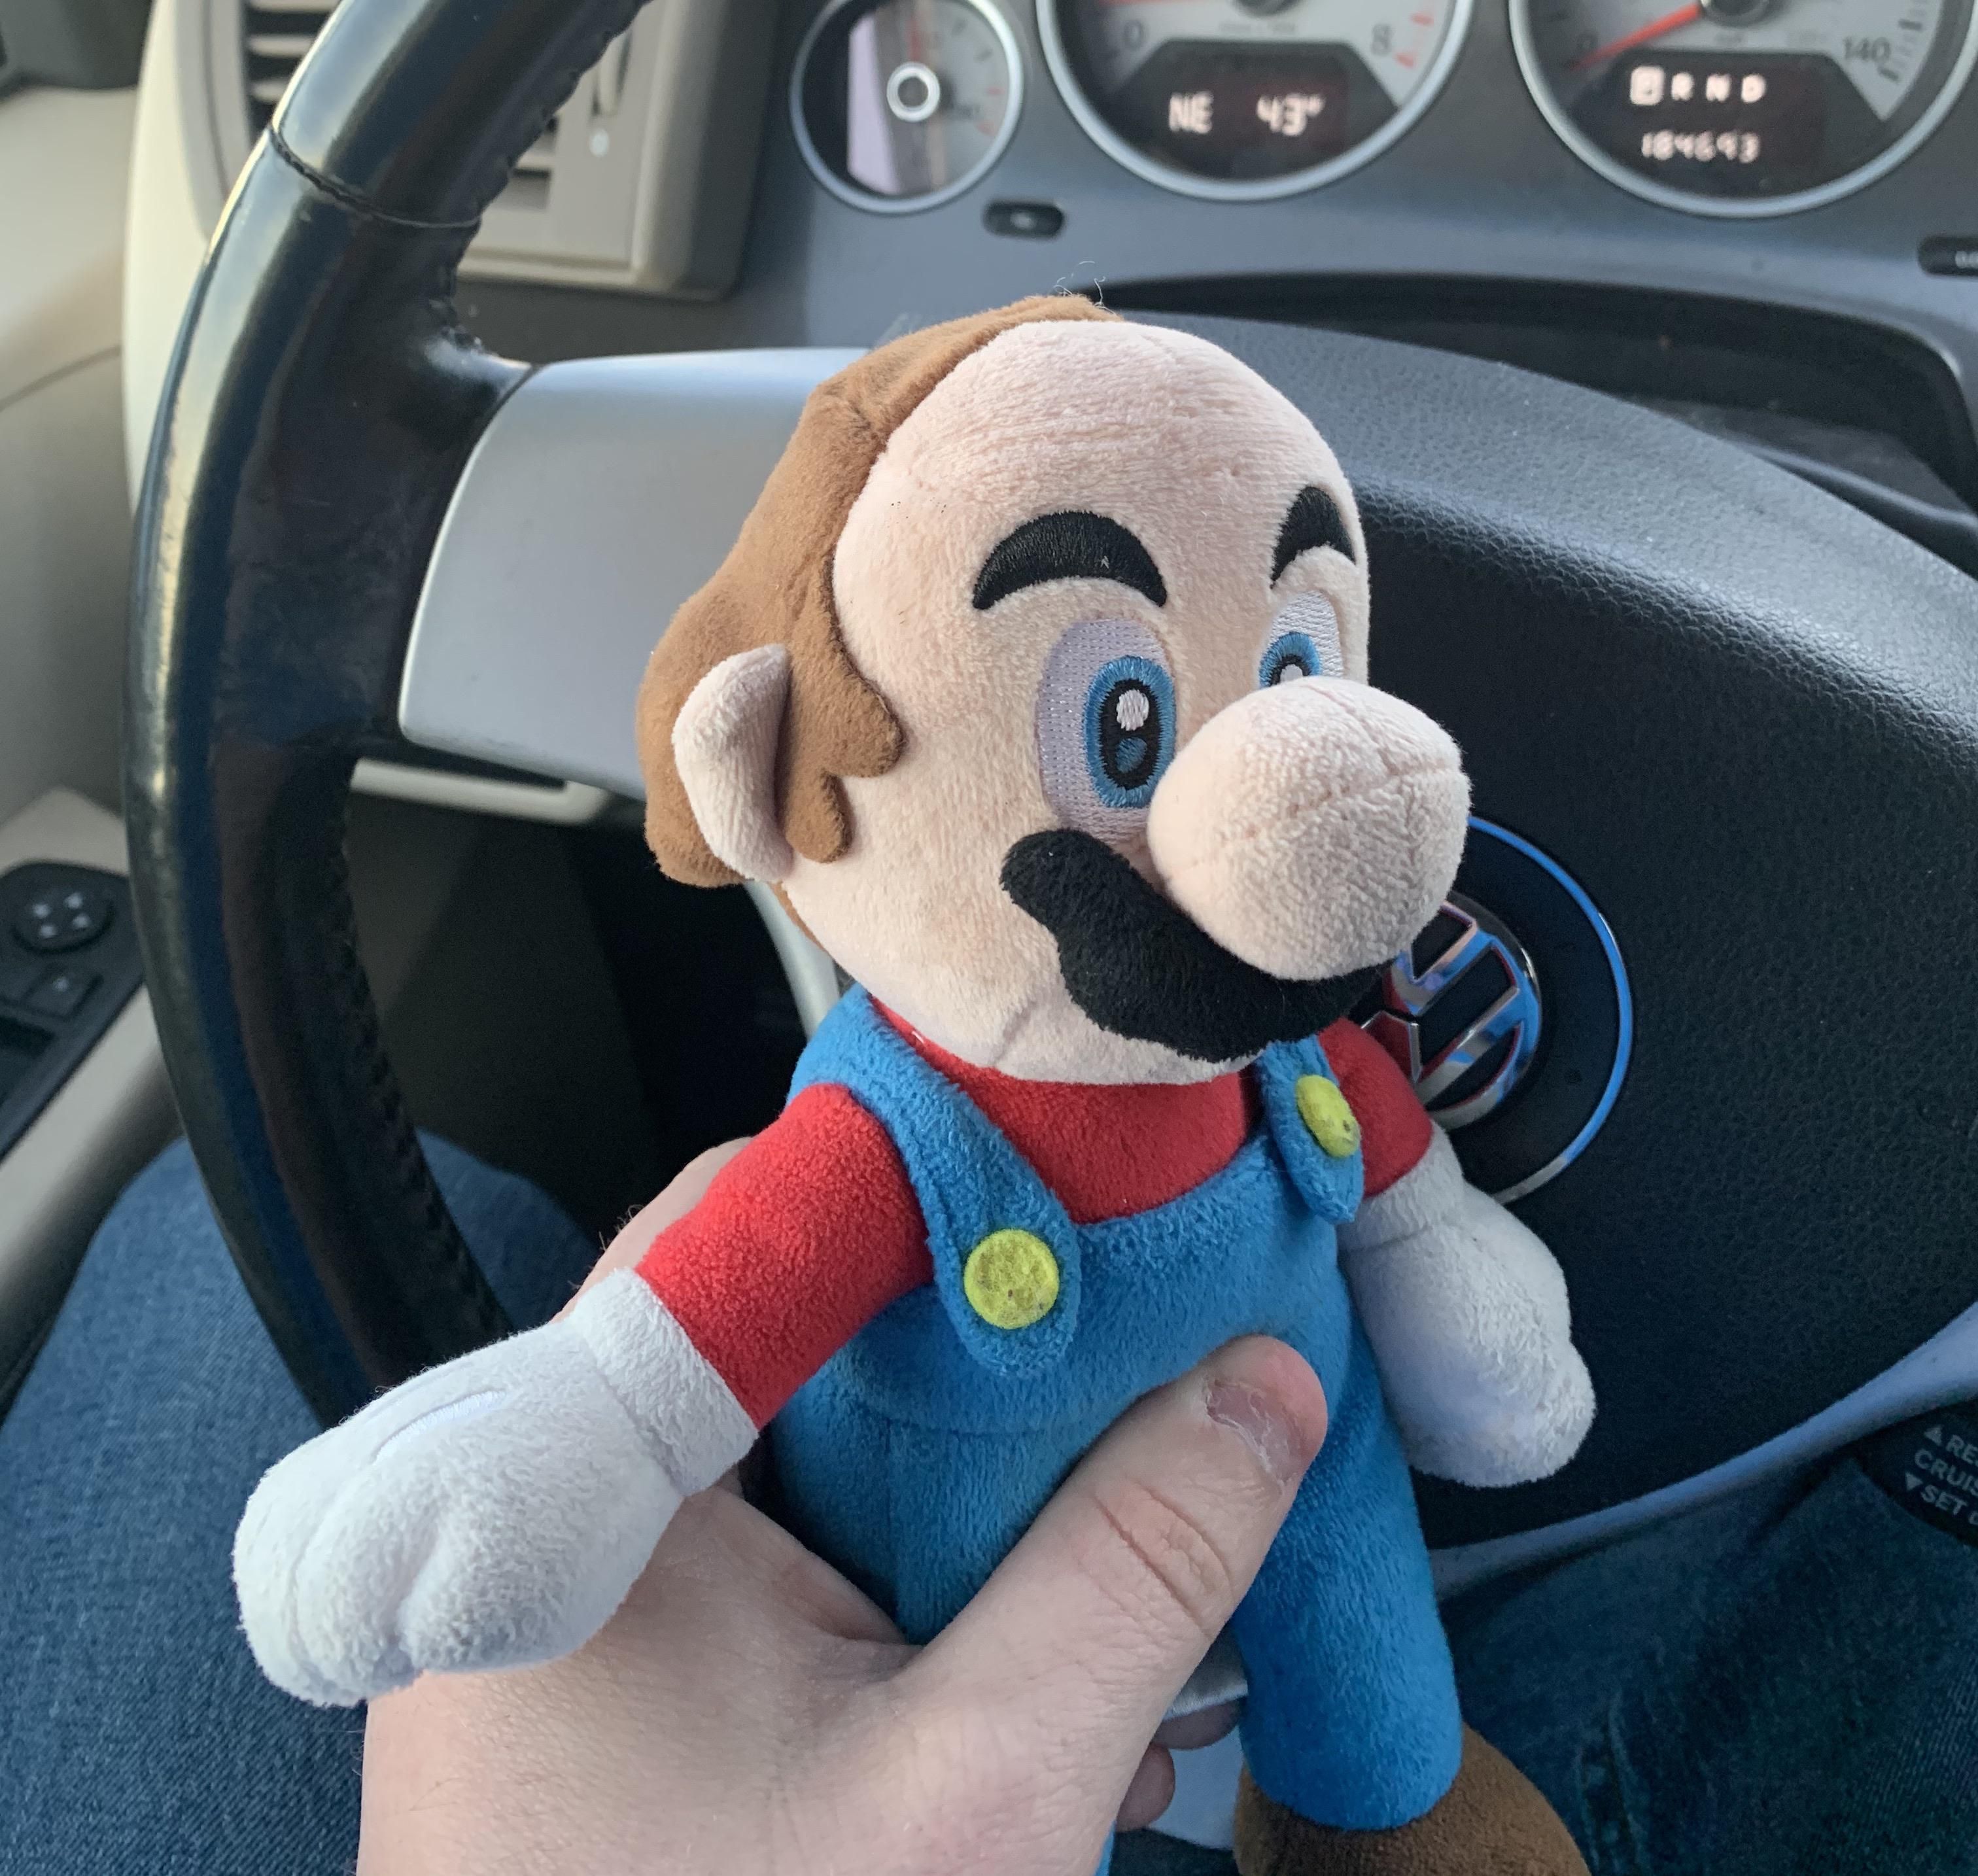 My son cut his Mario hat off. Didn’t realize it was Ron Jeremy hiding under there.